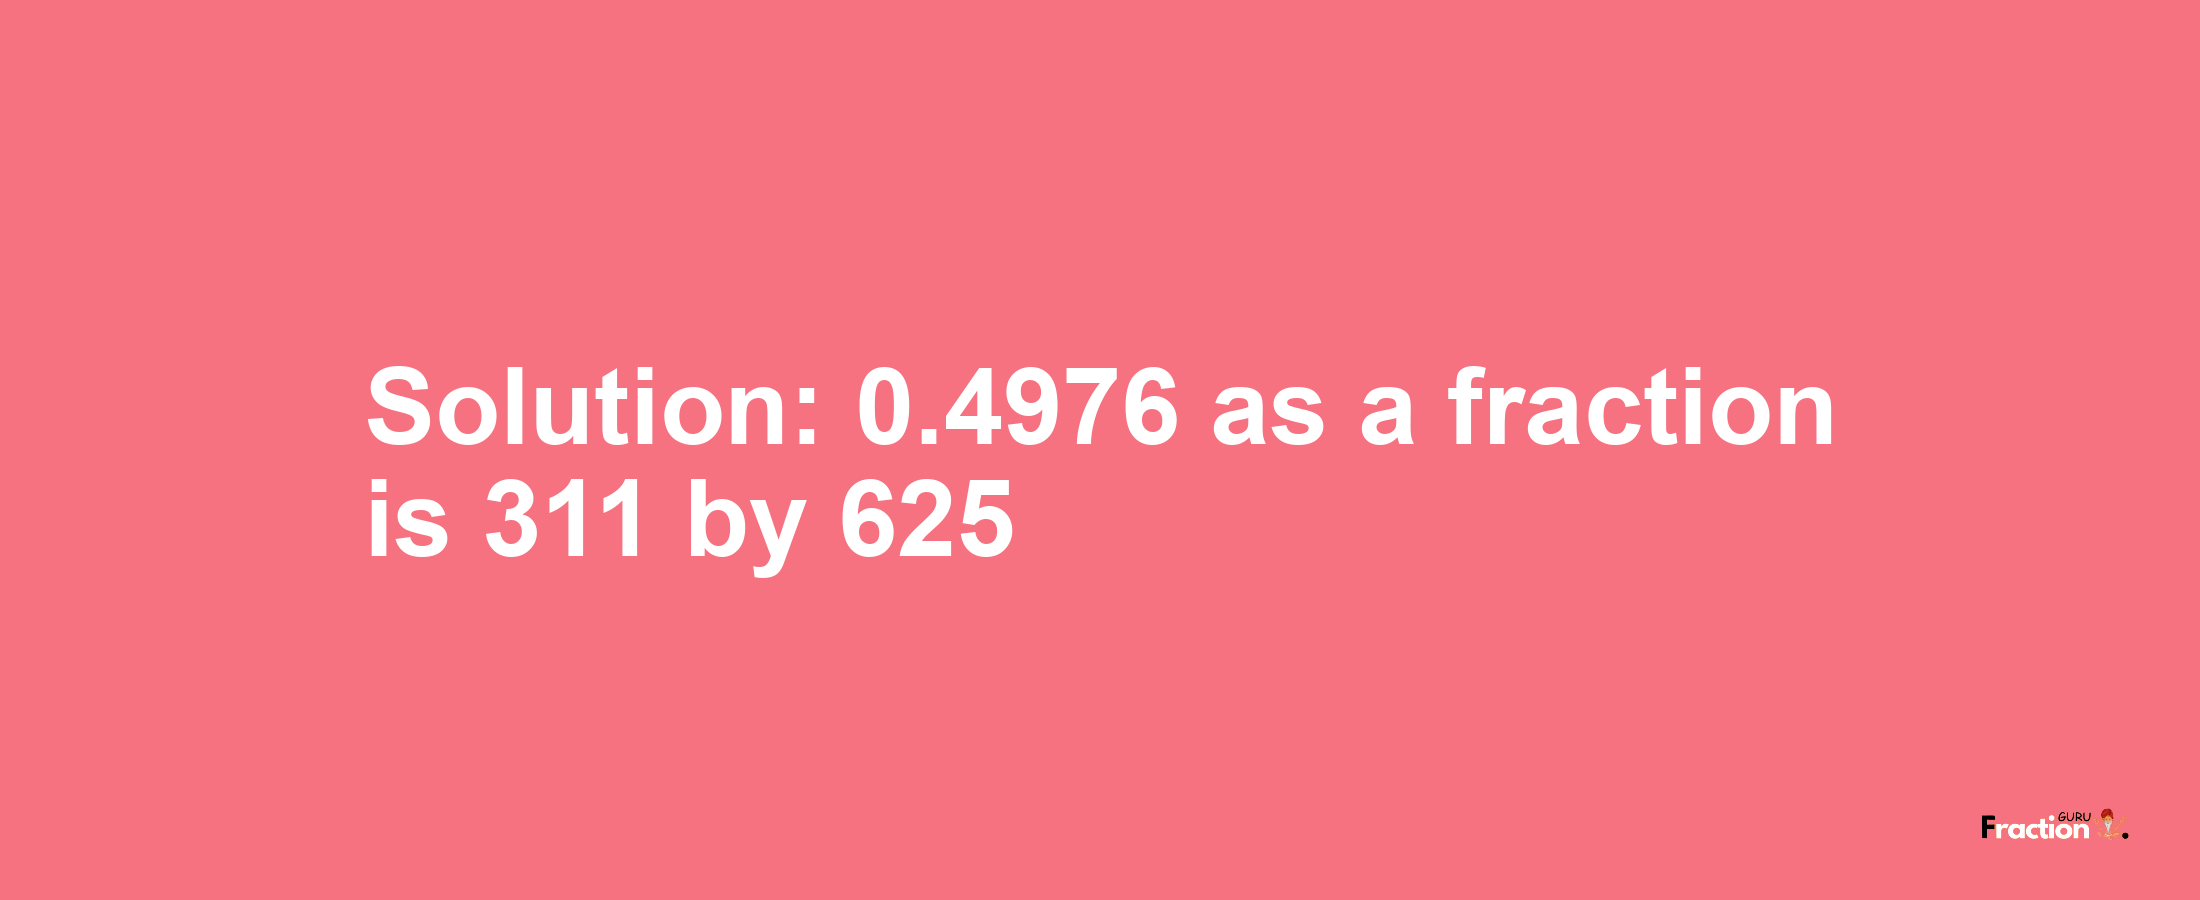 Solution:0.4976 as a fraction is 311/625